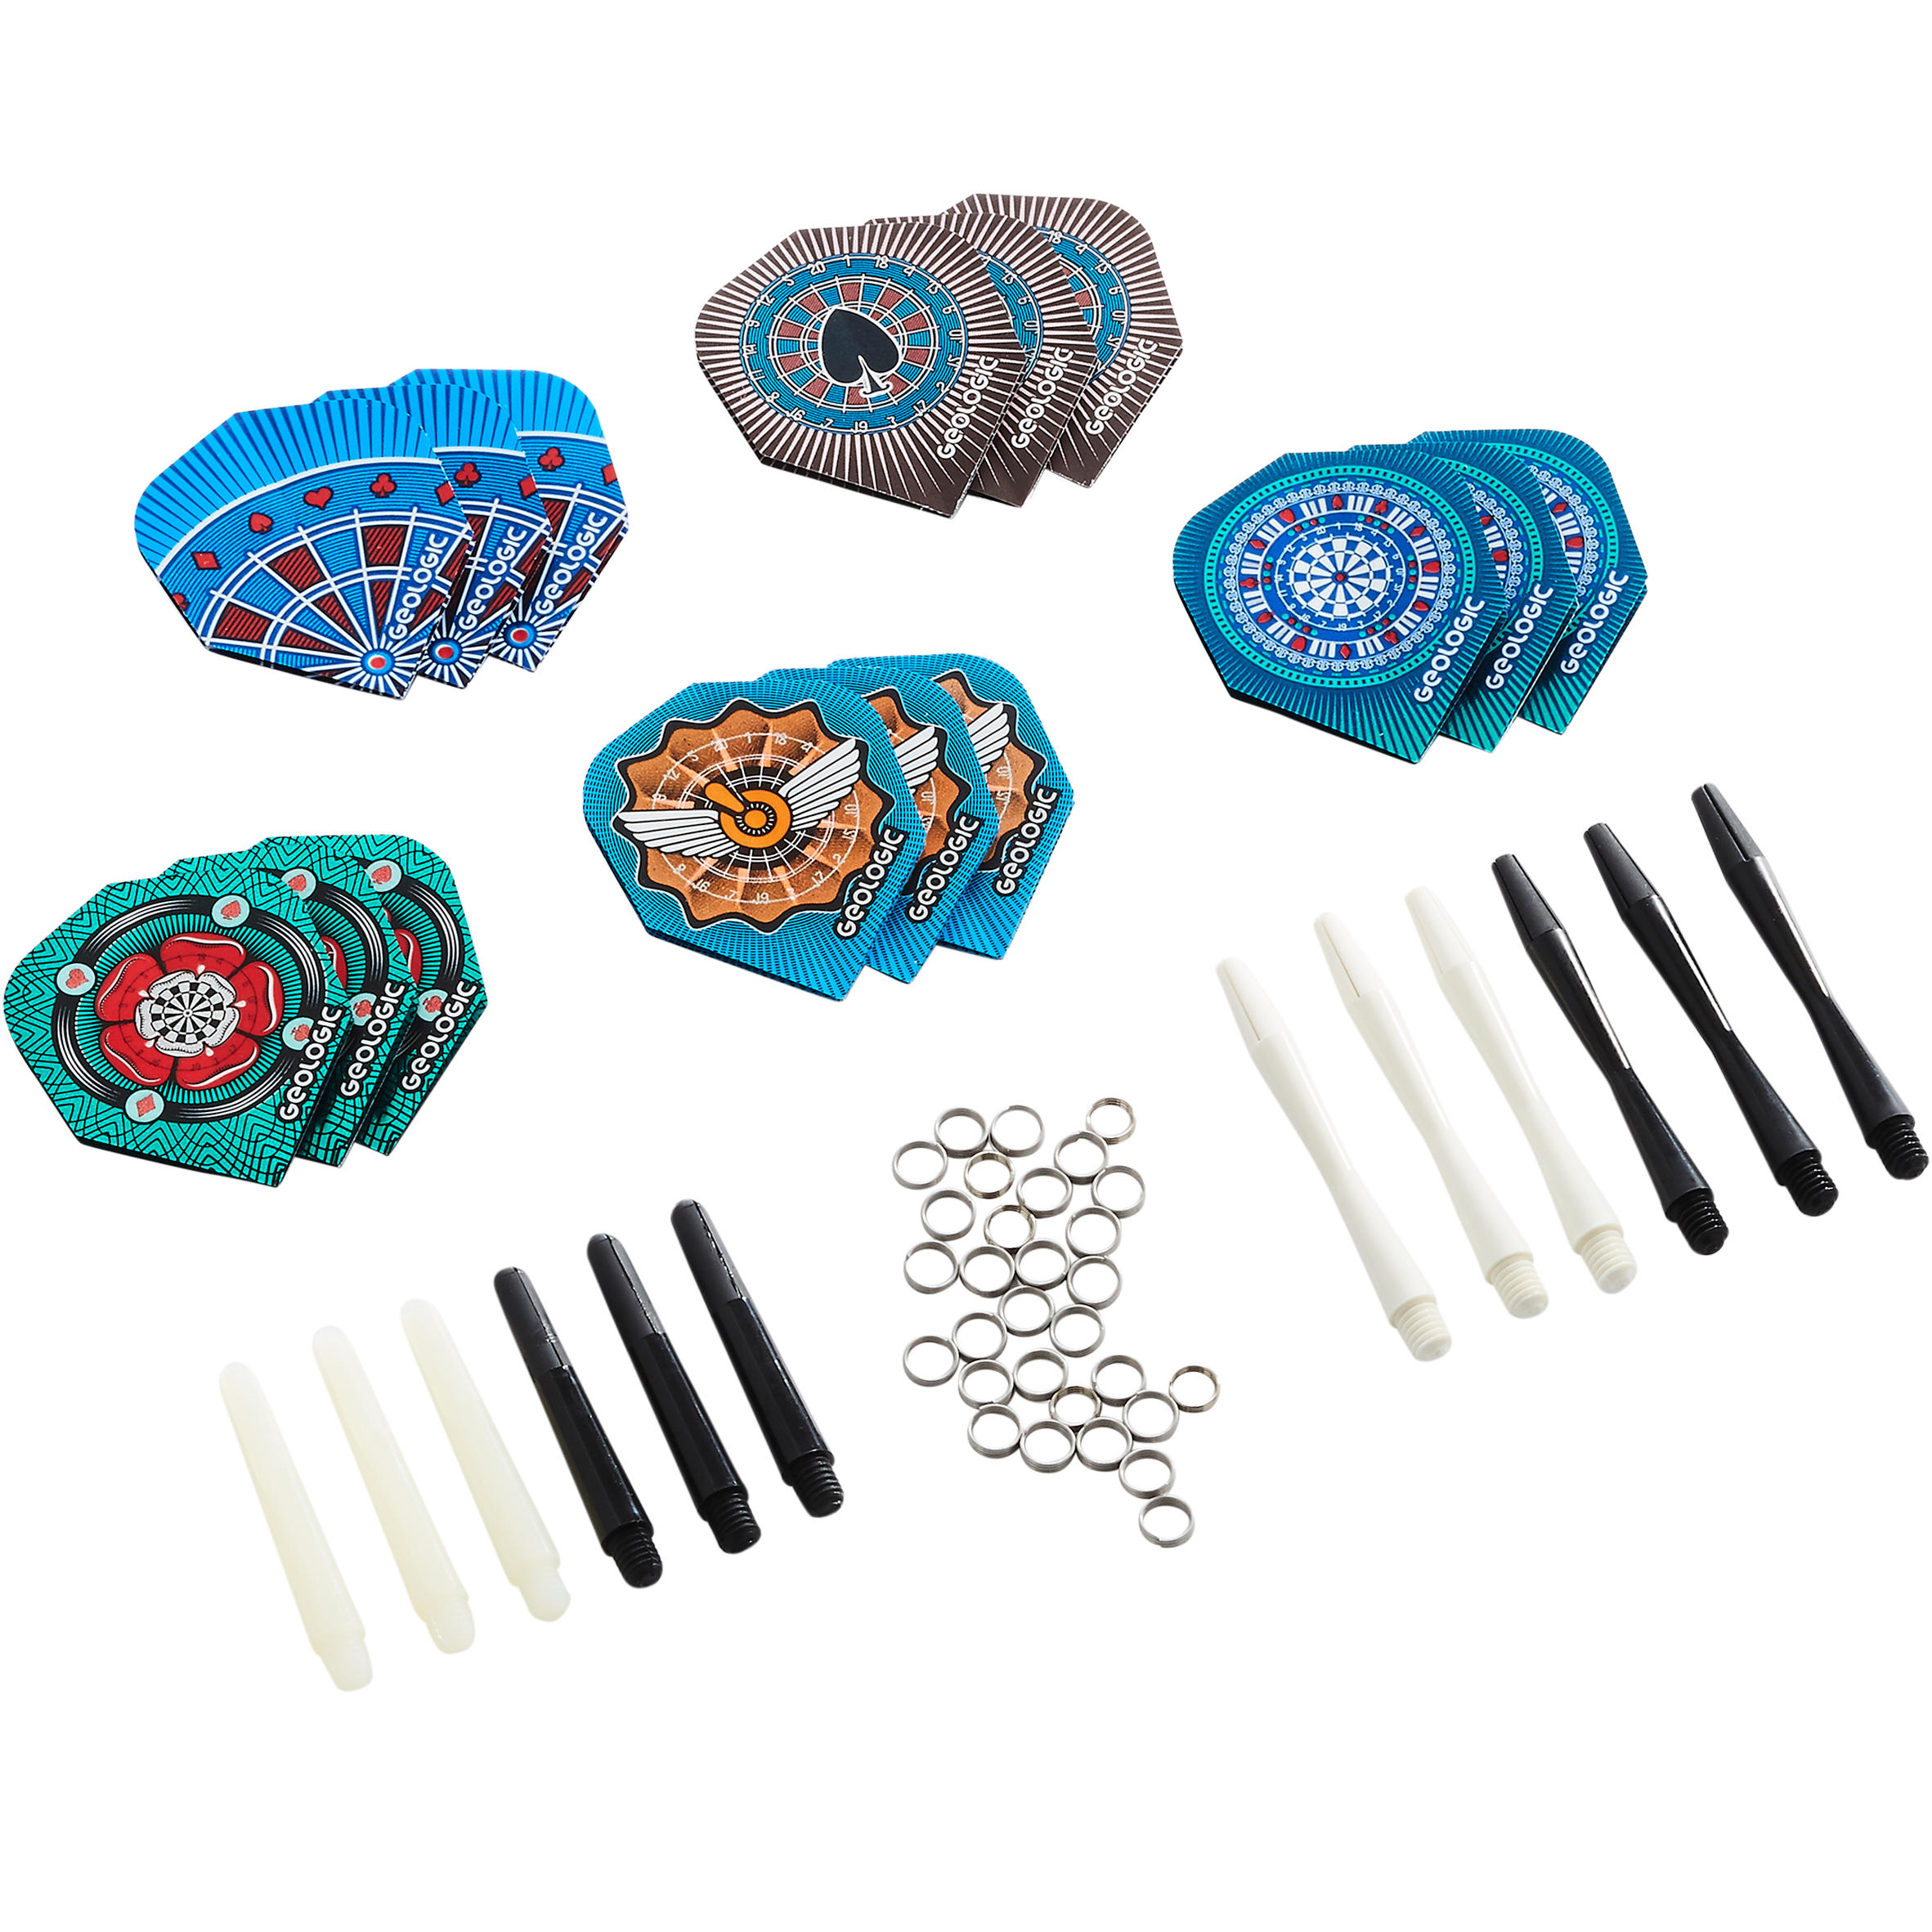 Darts Accessories Kit - CANAVERAL